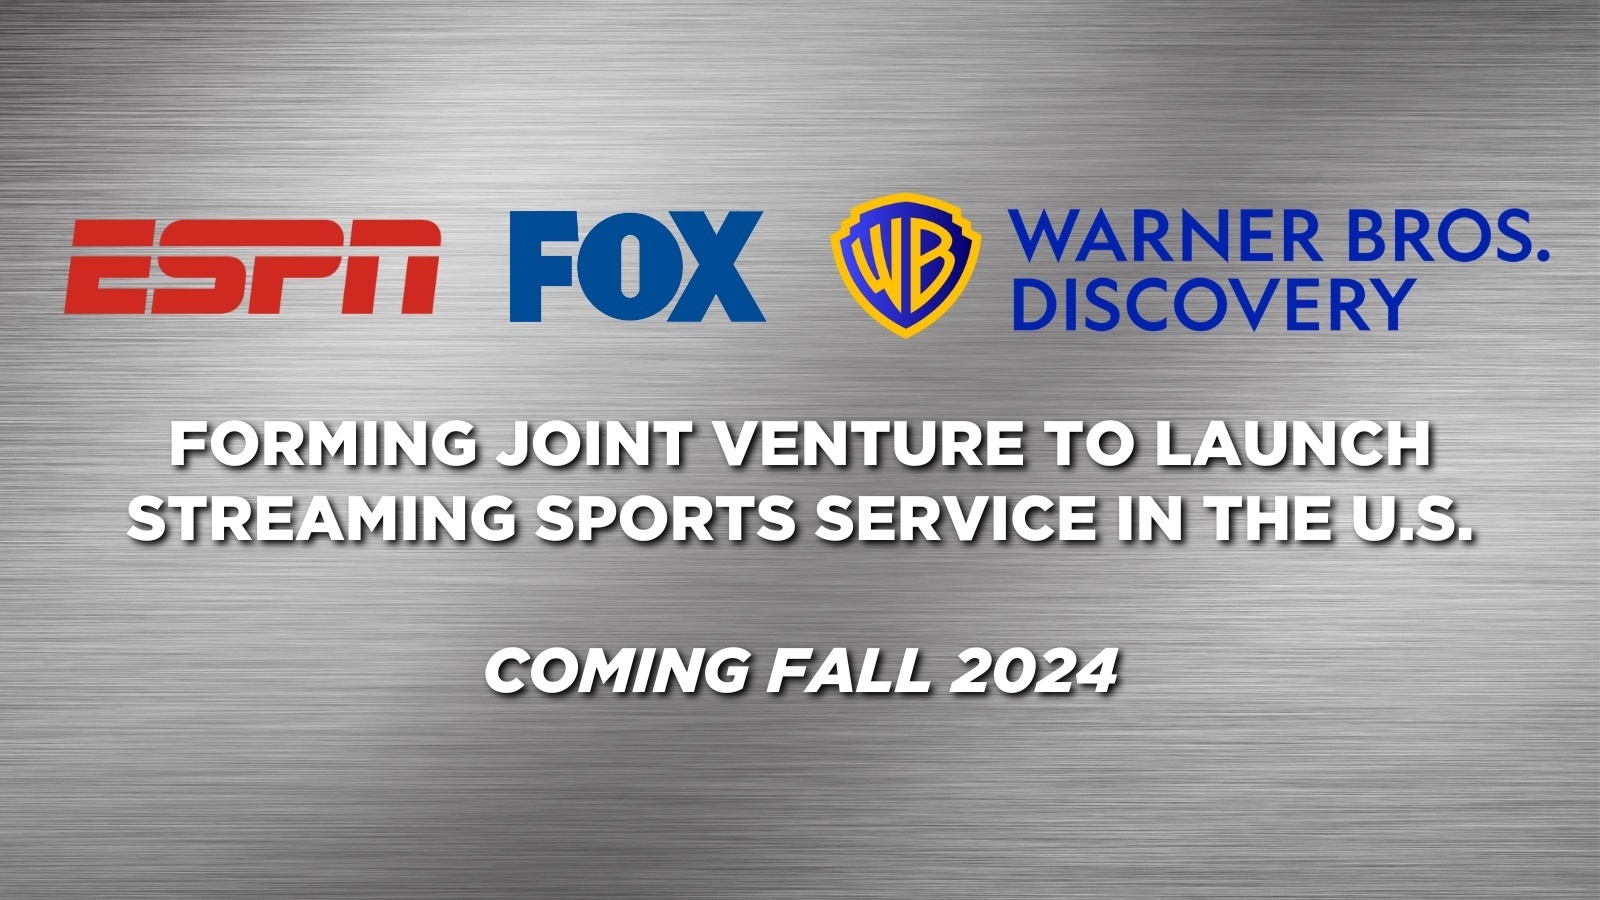 ESPN, FOX & Warner Bros. Discovery to Launch Sports Streaming Site in U.S